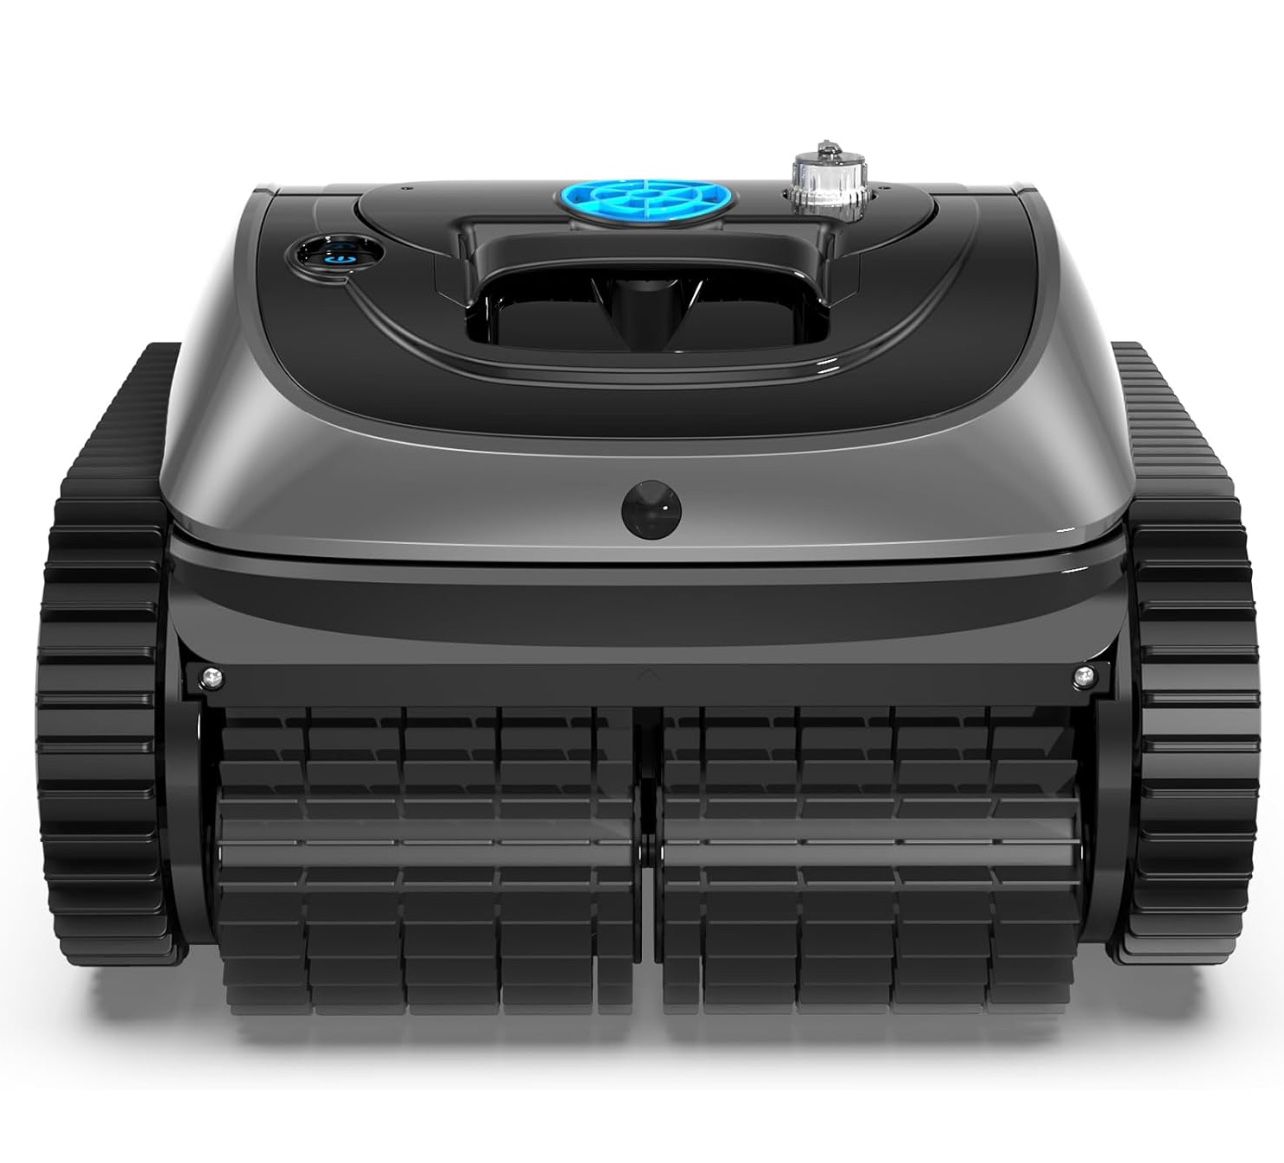 C1 Robotic Pool Cleaner, 150mins Runtime, Cordless Pool Vacuum Robot with Upgraded Triple-Motor, Wall Climbing, Intelligent Route Planning, Ideal for 